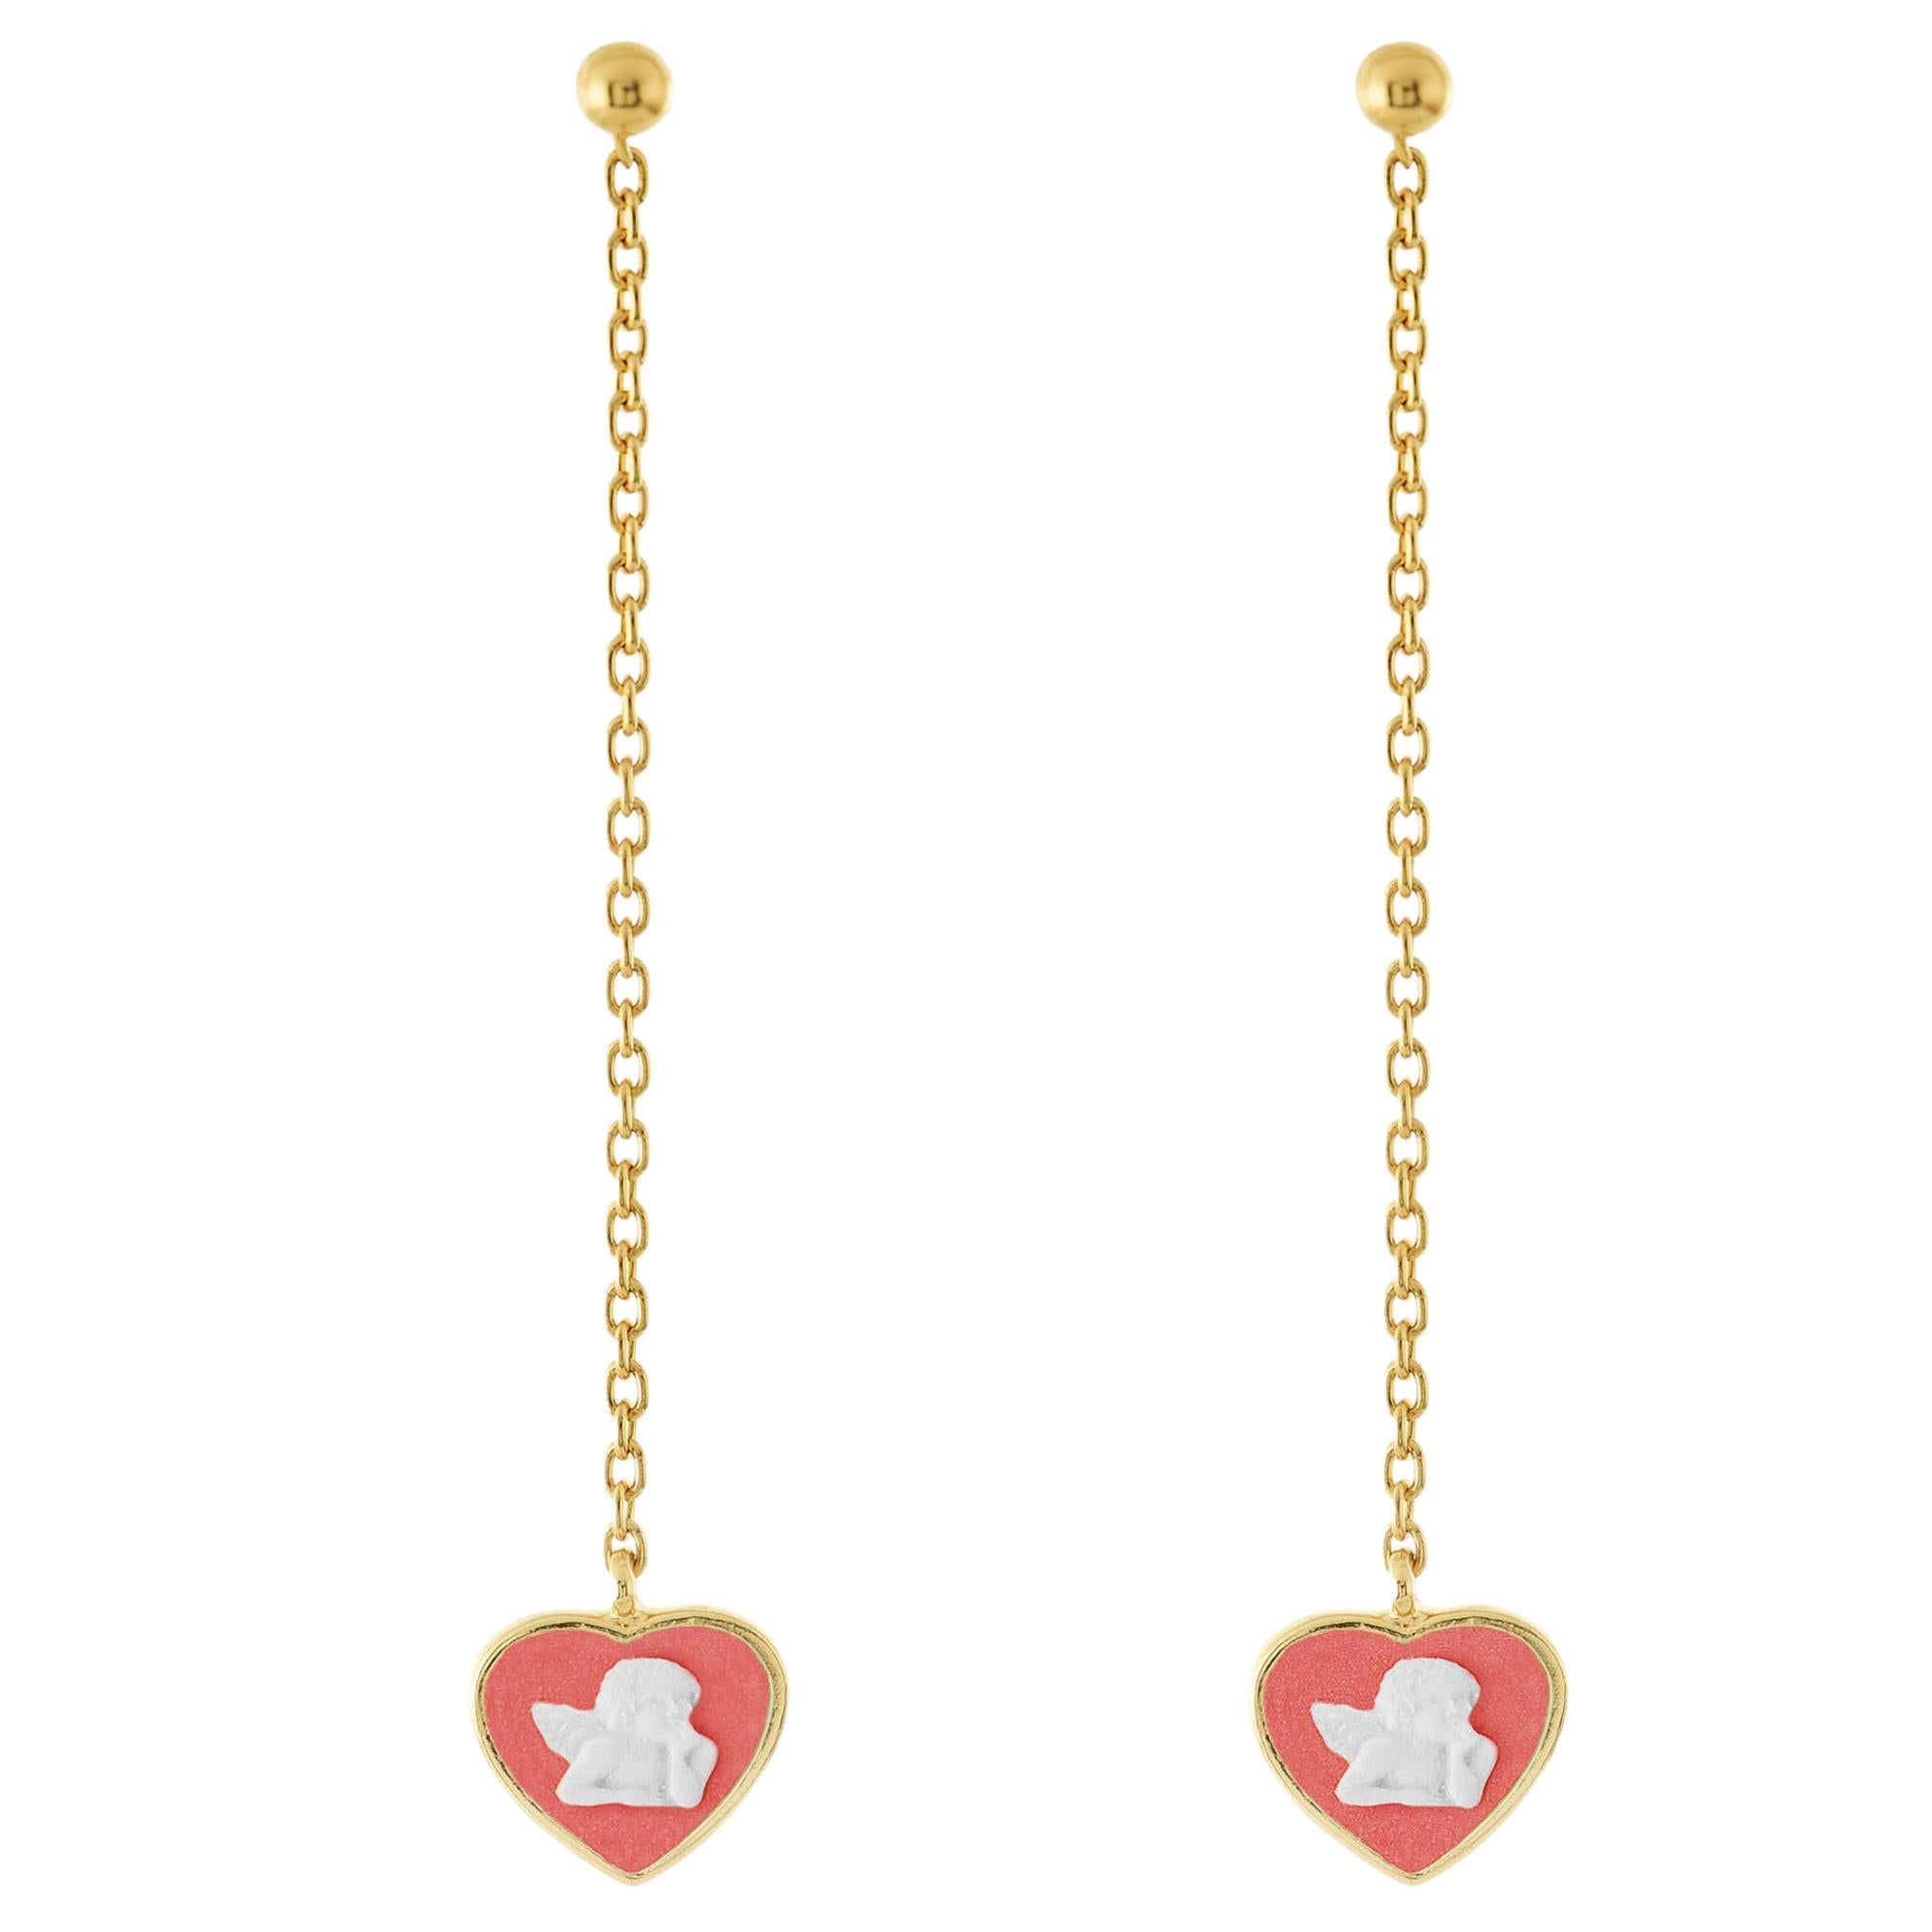 18 Karat Gold-Plated Sterling Silver Cameo Chain Earrings